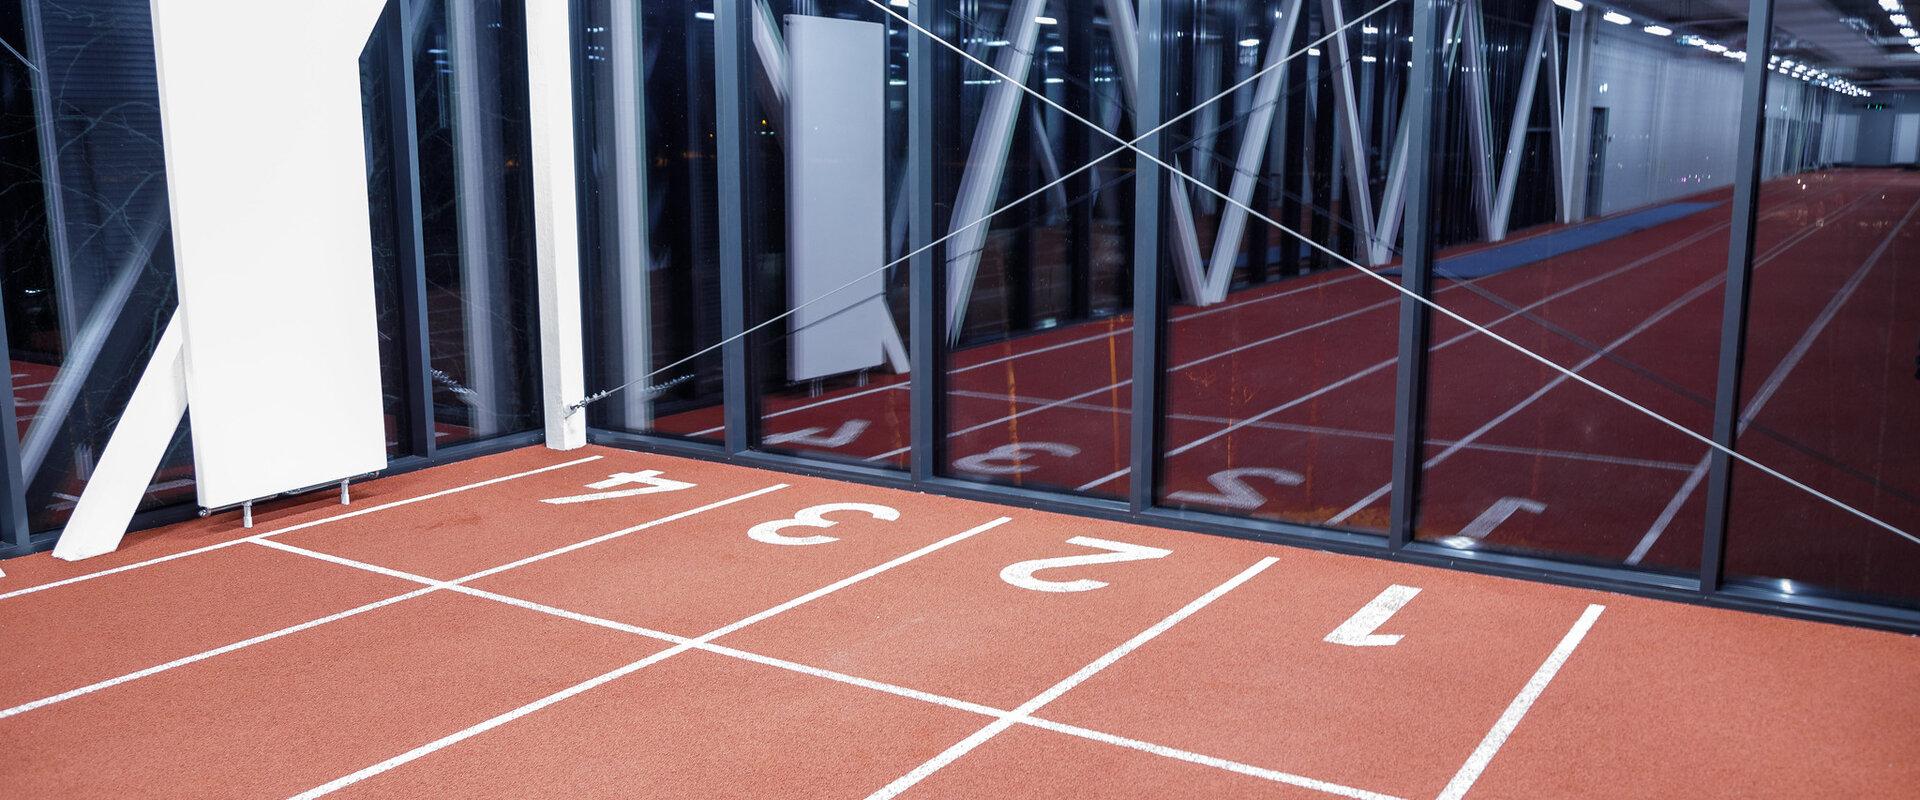 Running tracks in the glass gallery